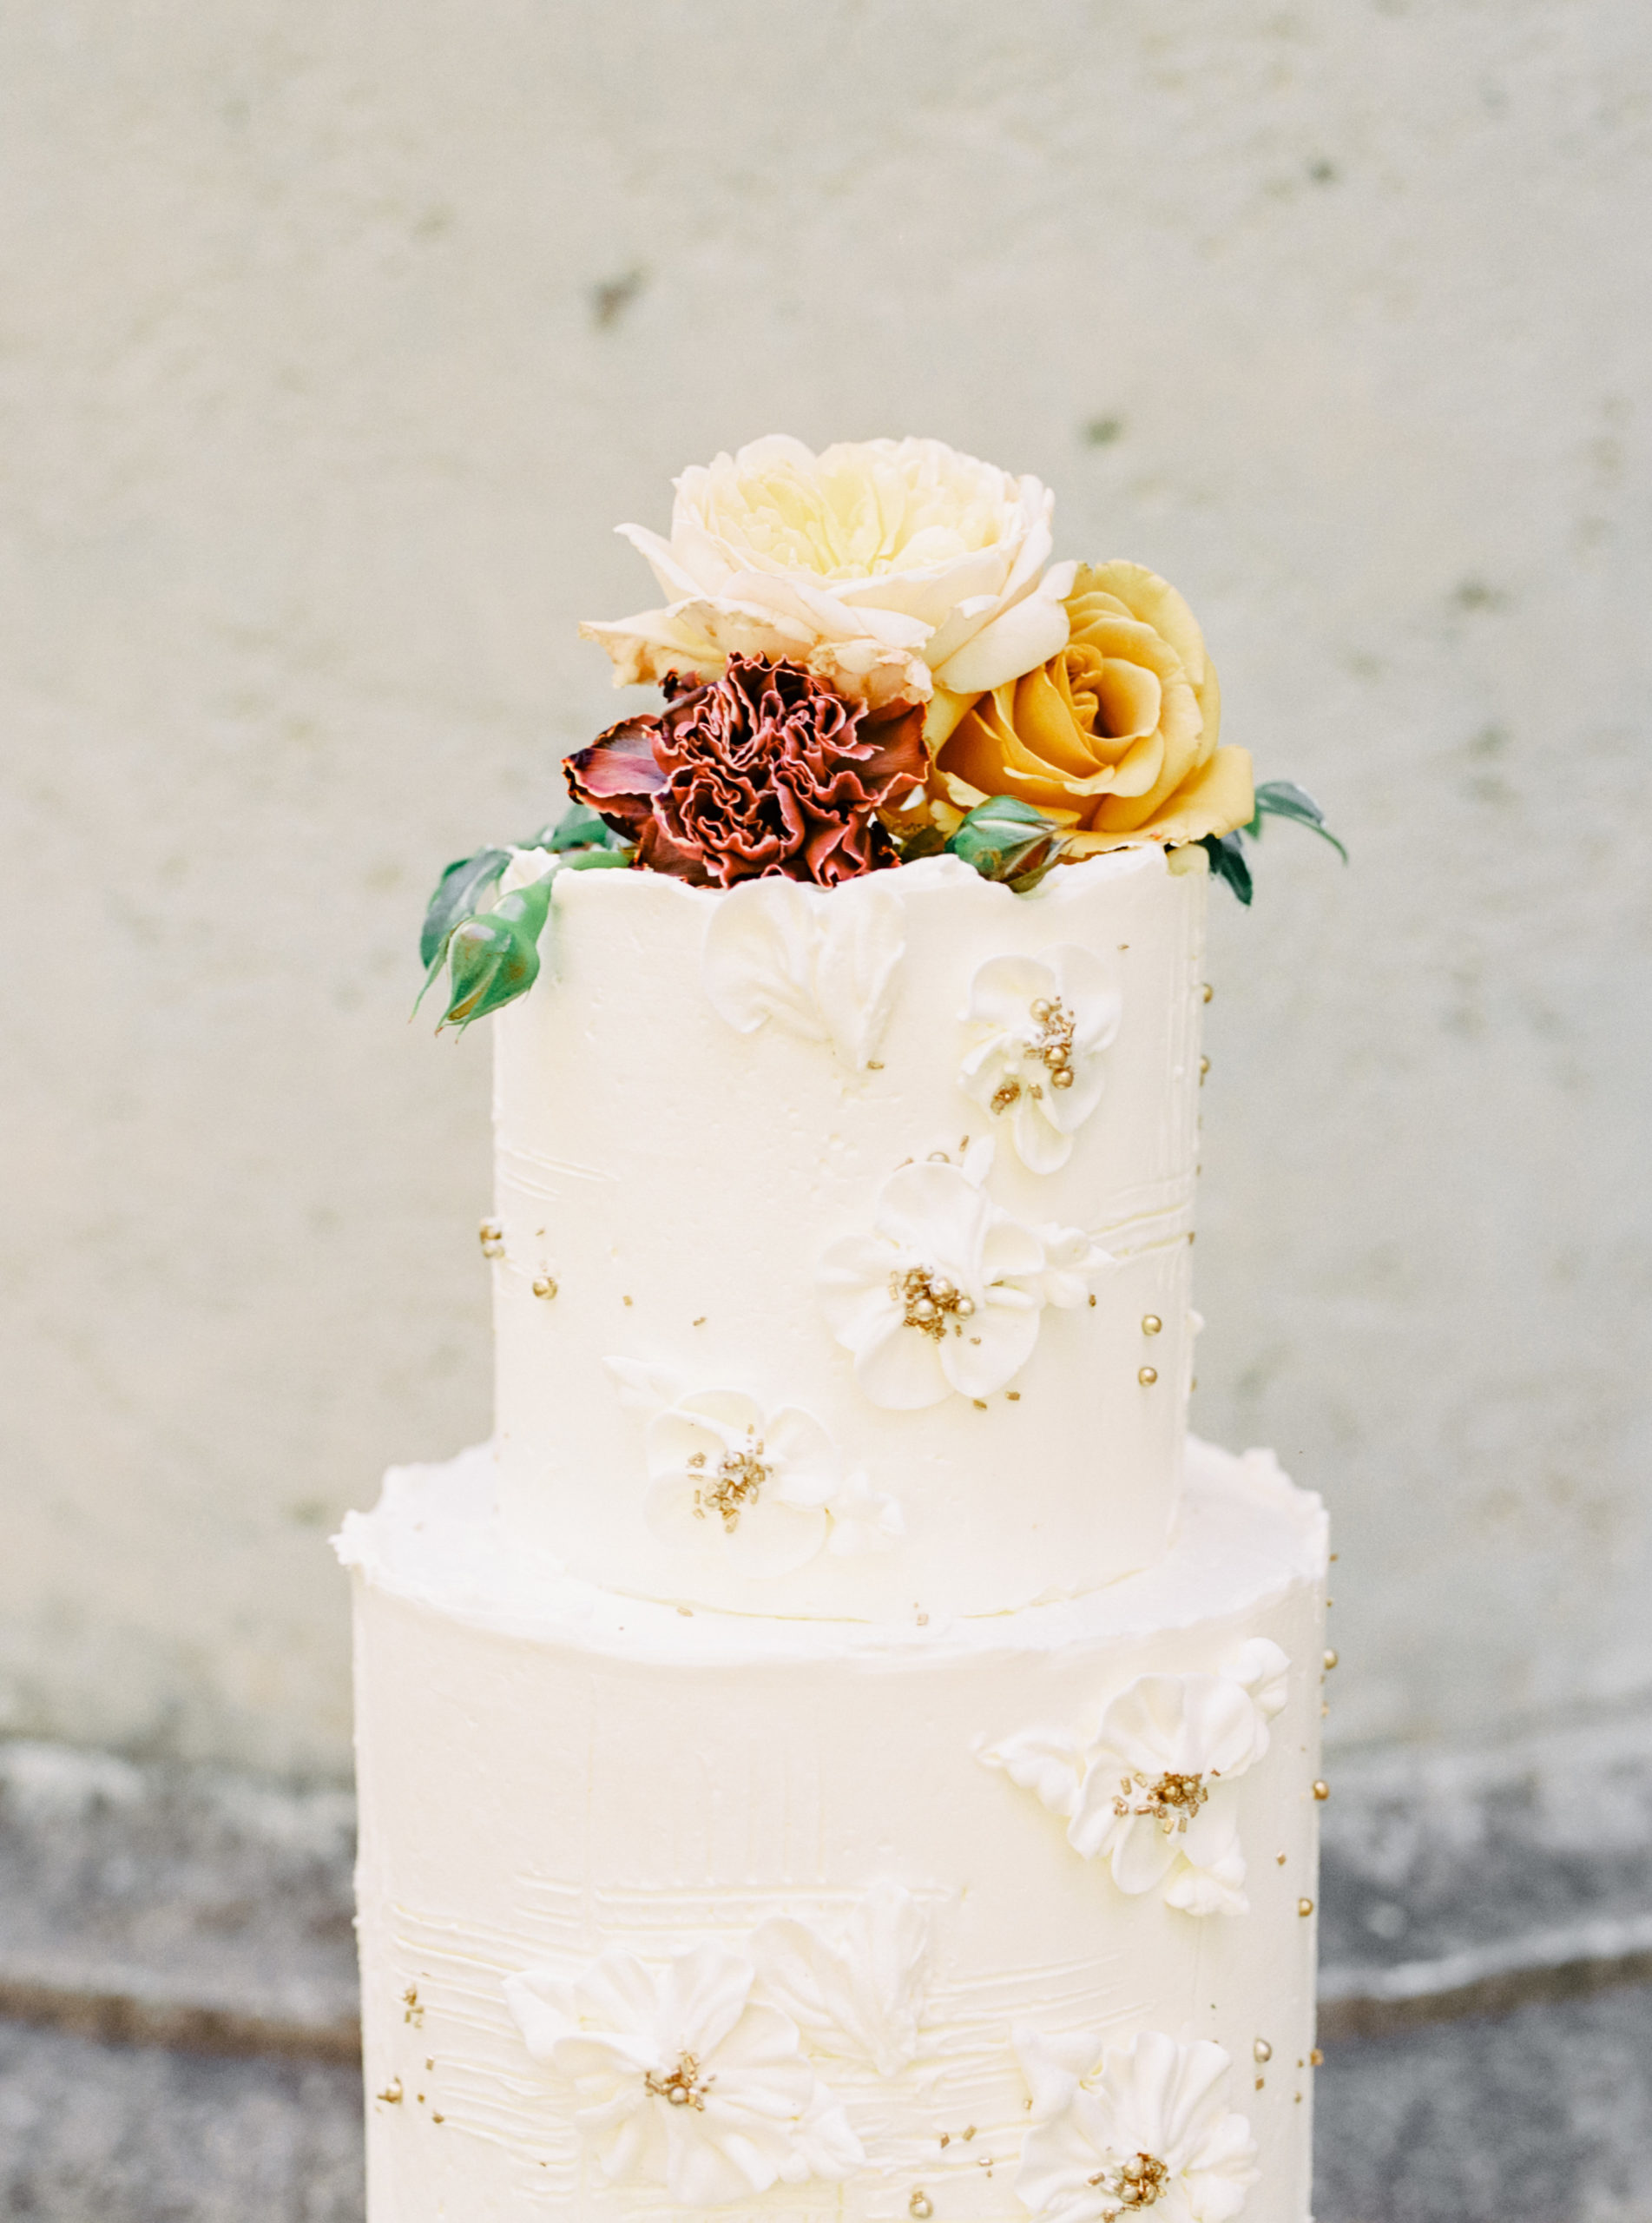 Does Having a Fake Wedding Cake—and Serving Your Guests Sheet Cake